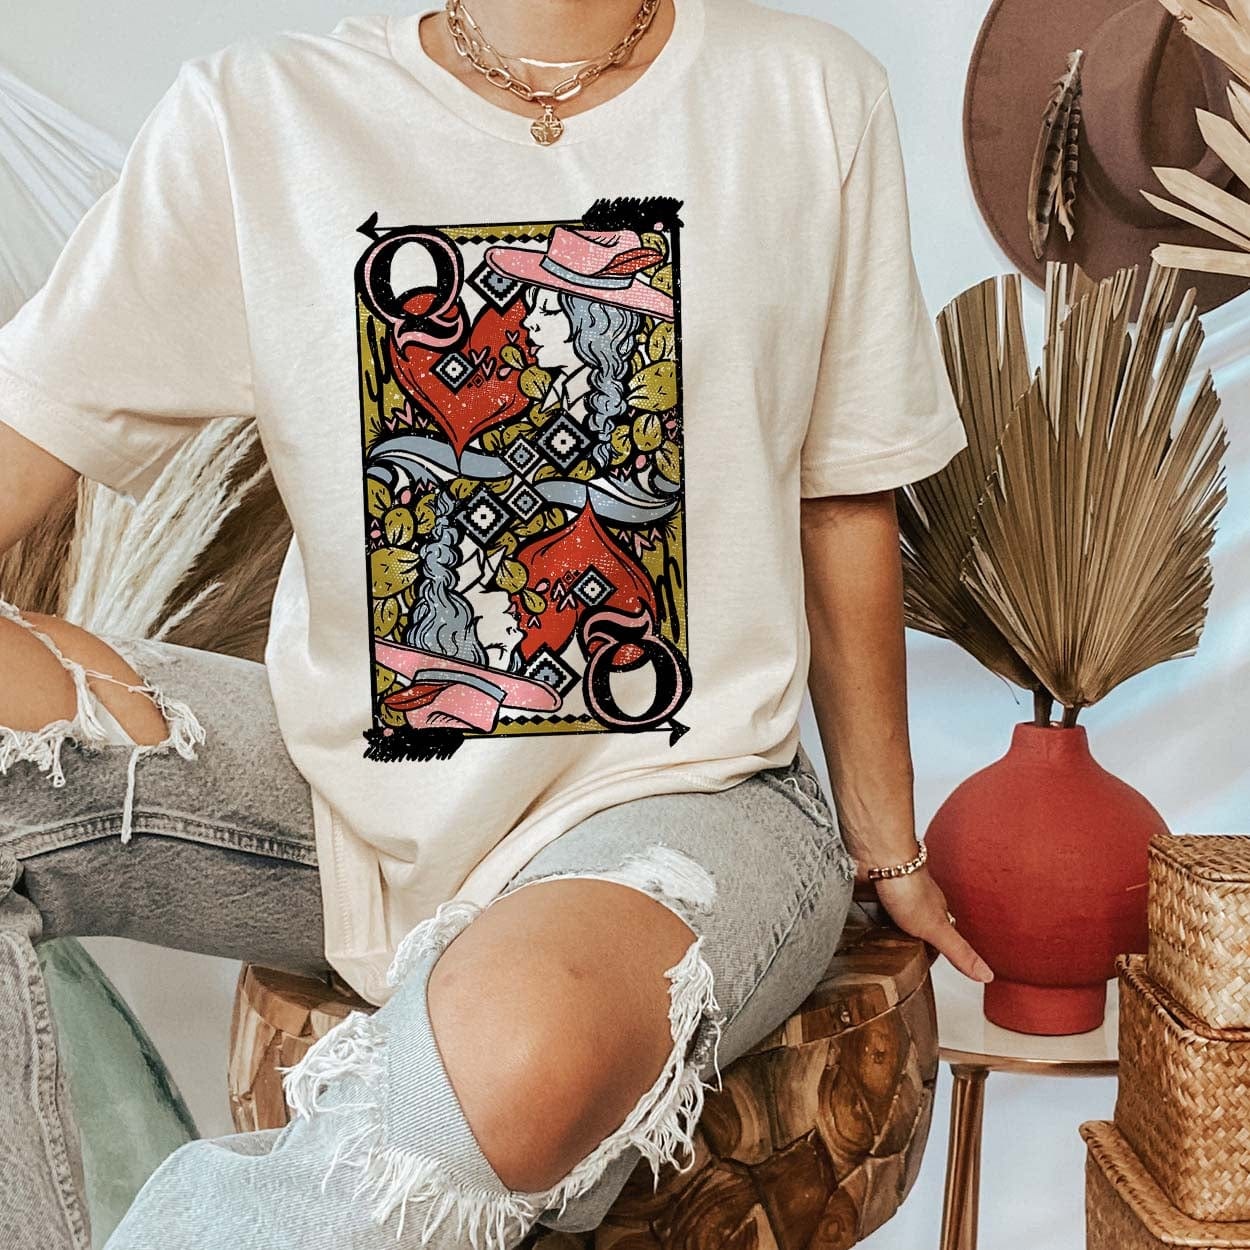 Model is wearing a cream colored tee with a Queen of Hearts playing card printed on the front. Model has it paired with distressed jeans and gold jewelry.